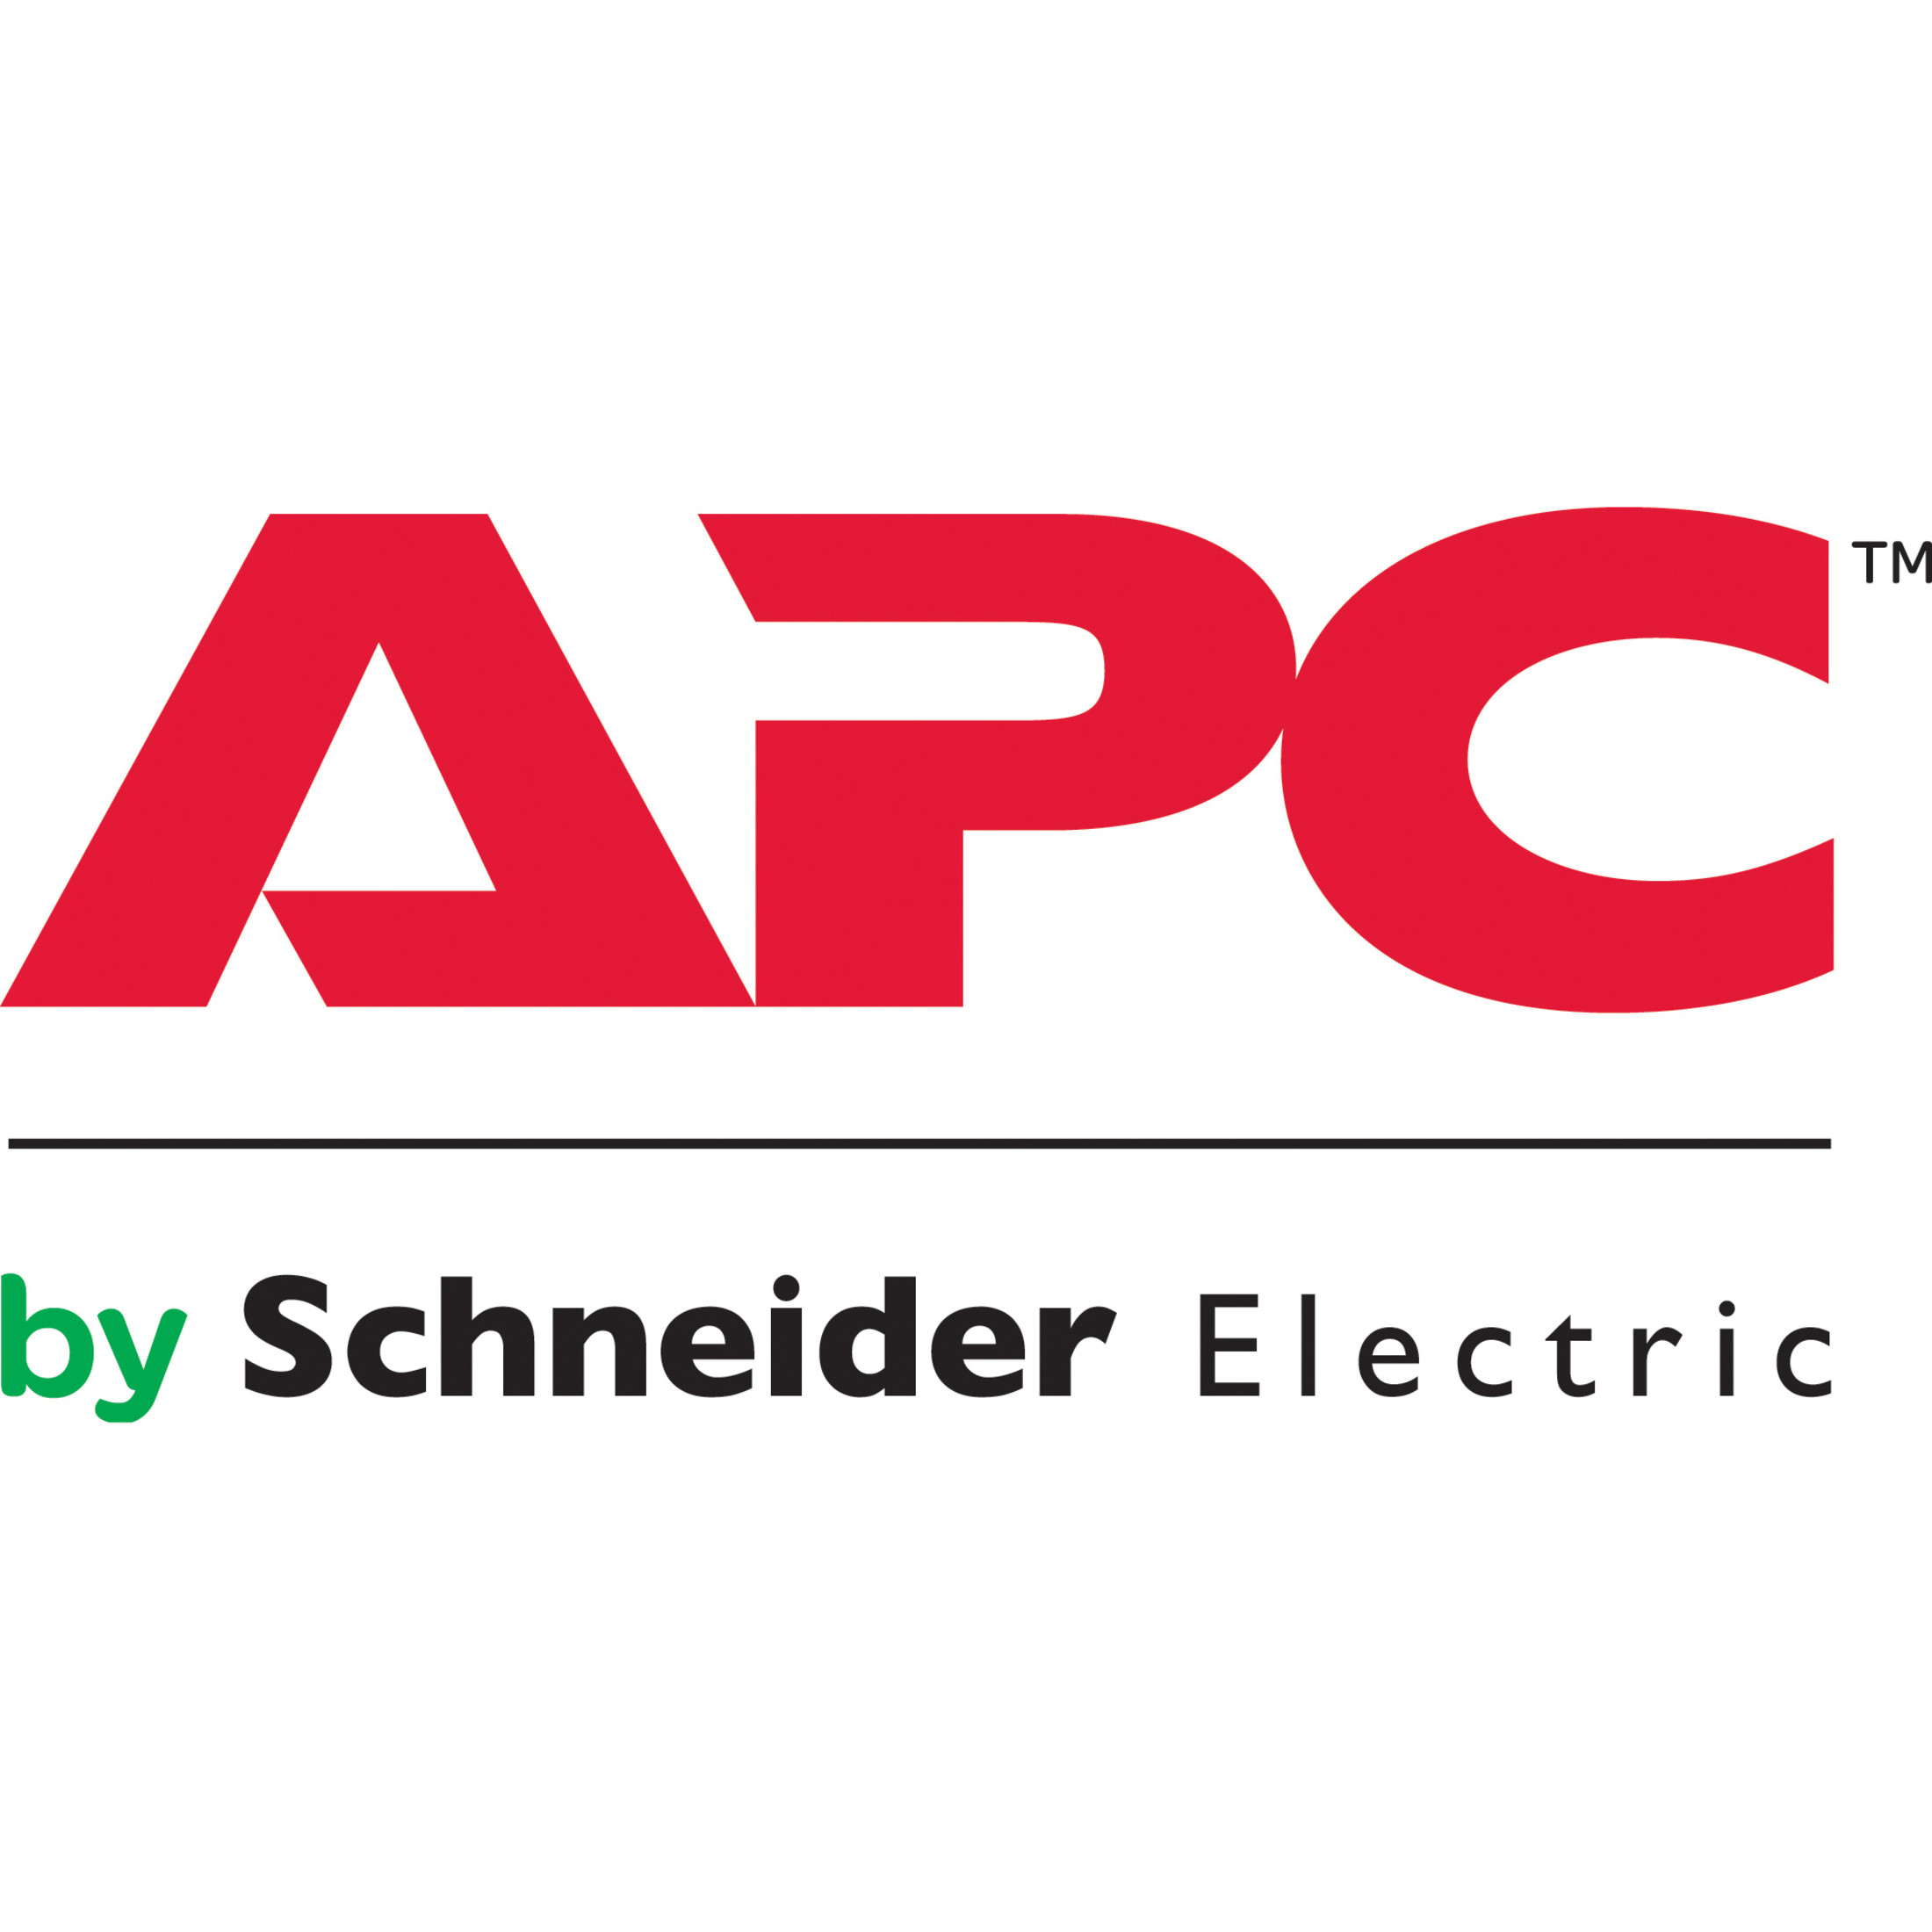 APC by Schneider Electric Data Center Operation IT OptimizeLicense100 Rack AP9160100